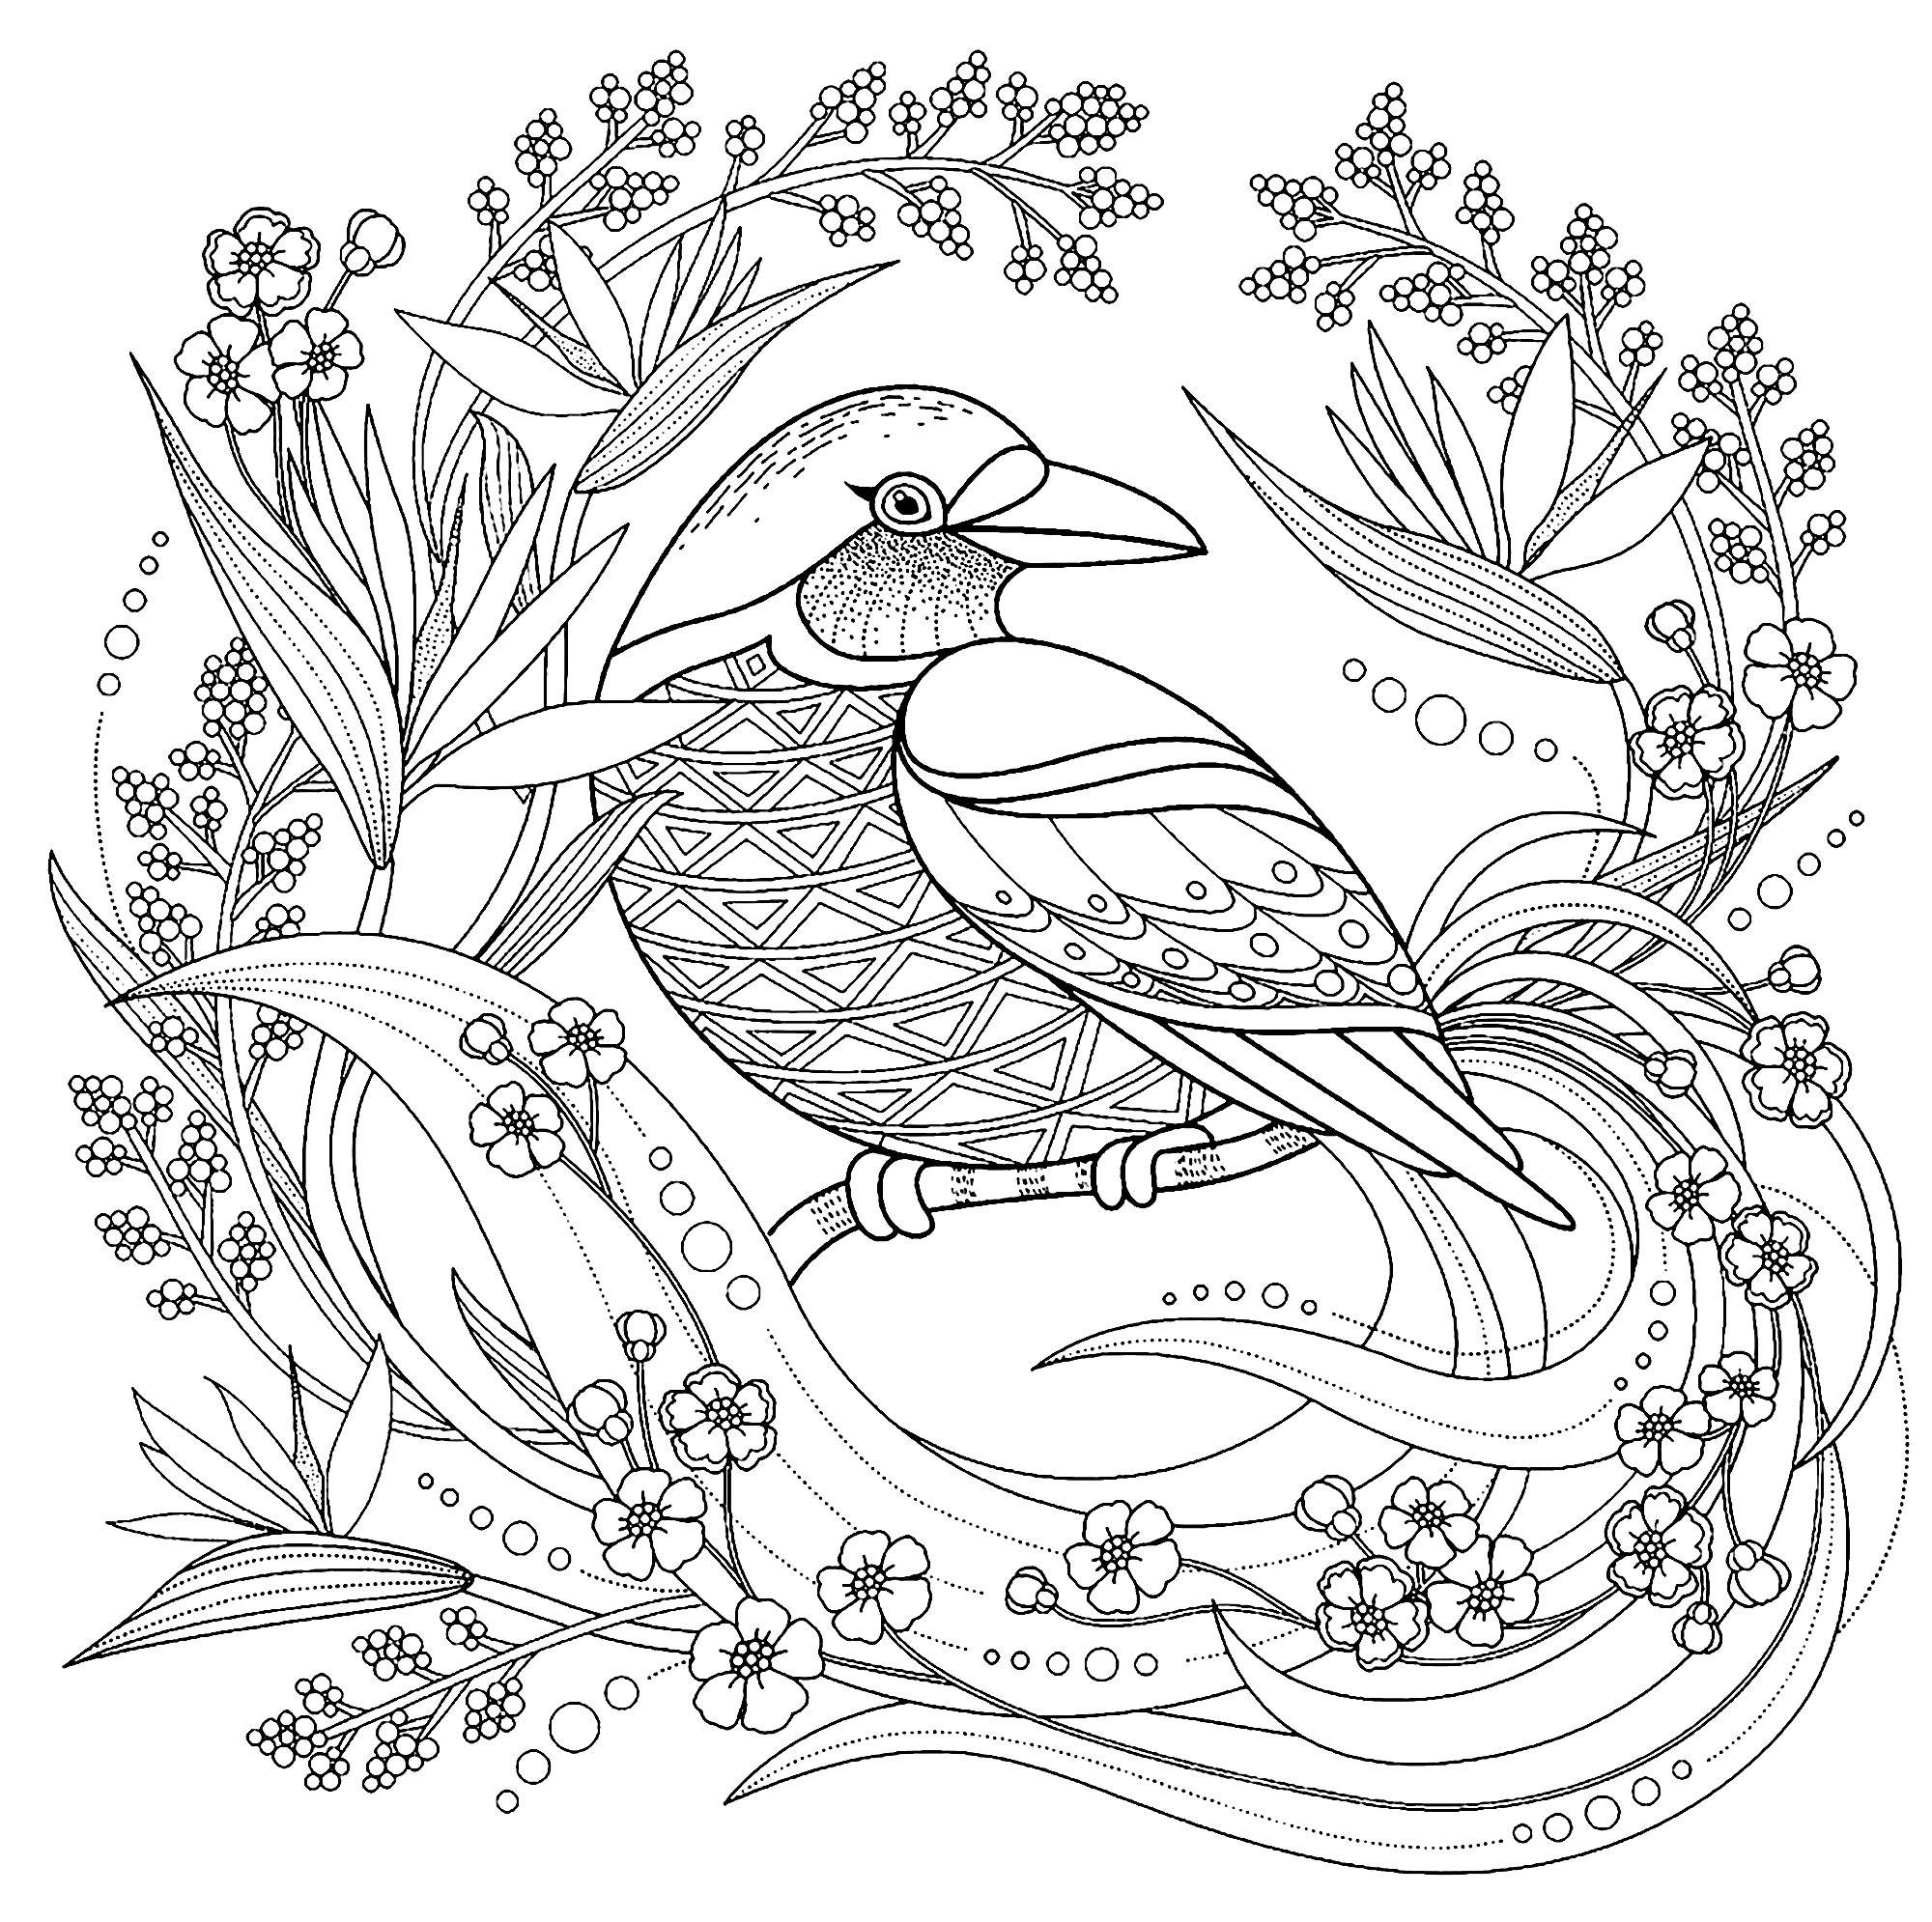 Download Birds free to color for children - Birds Kids Coloring Pages